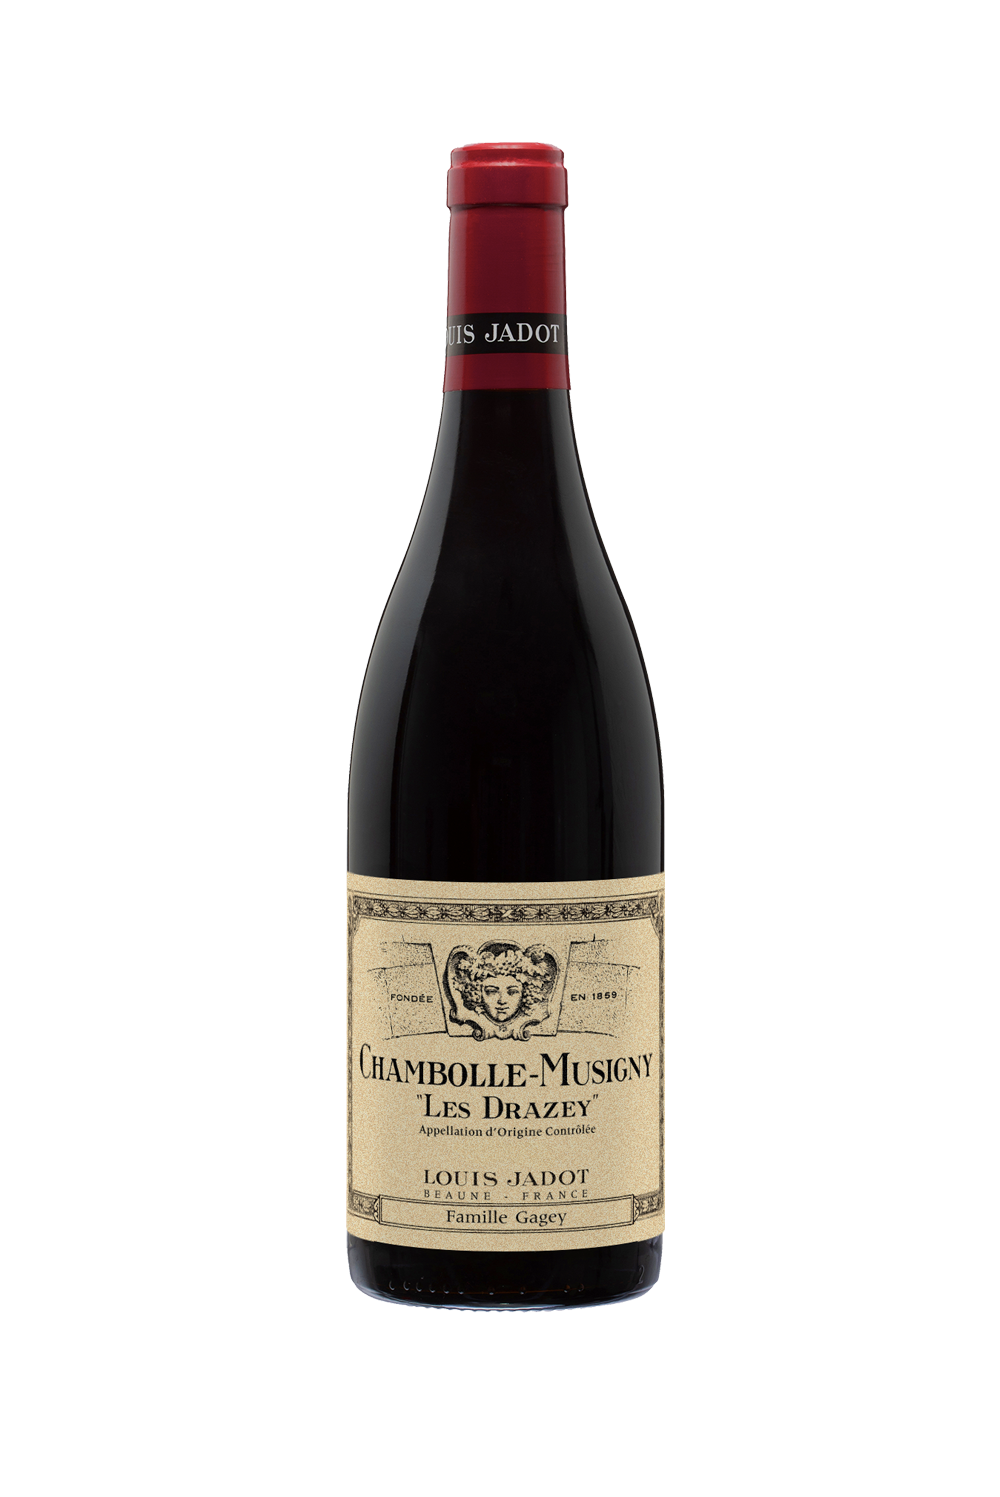 Chambolle-Musigny Les Drazey Louis Jadot